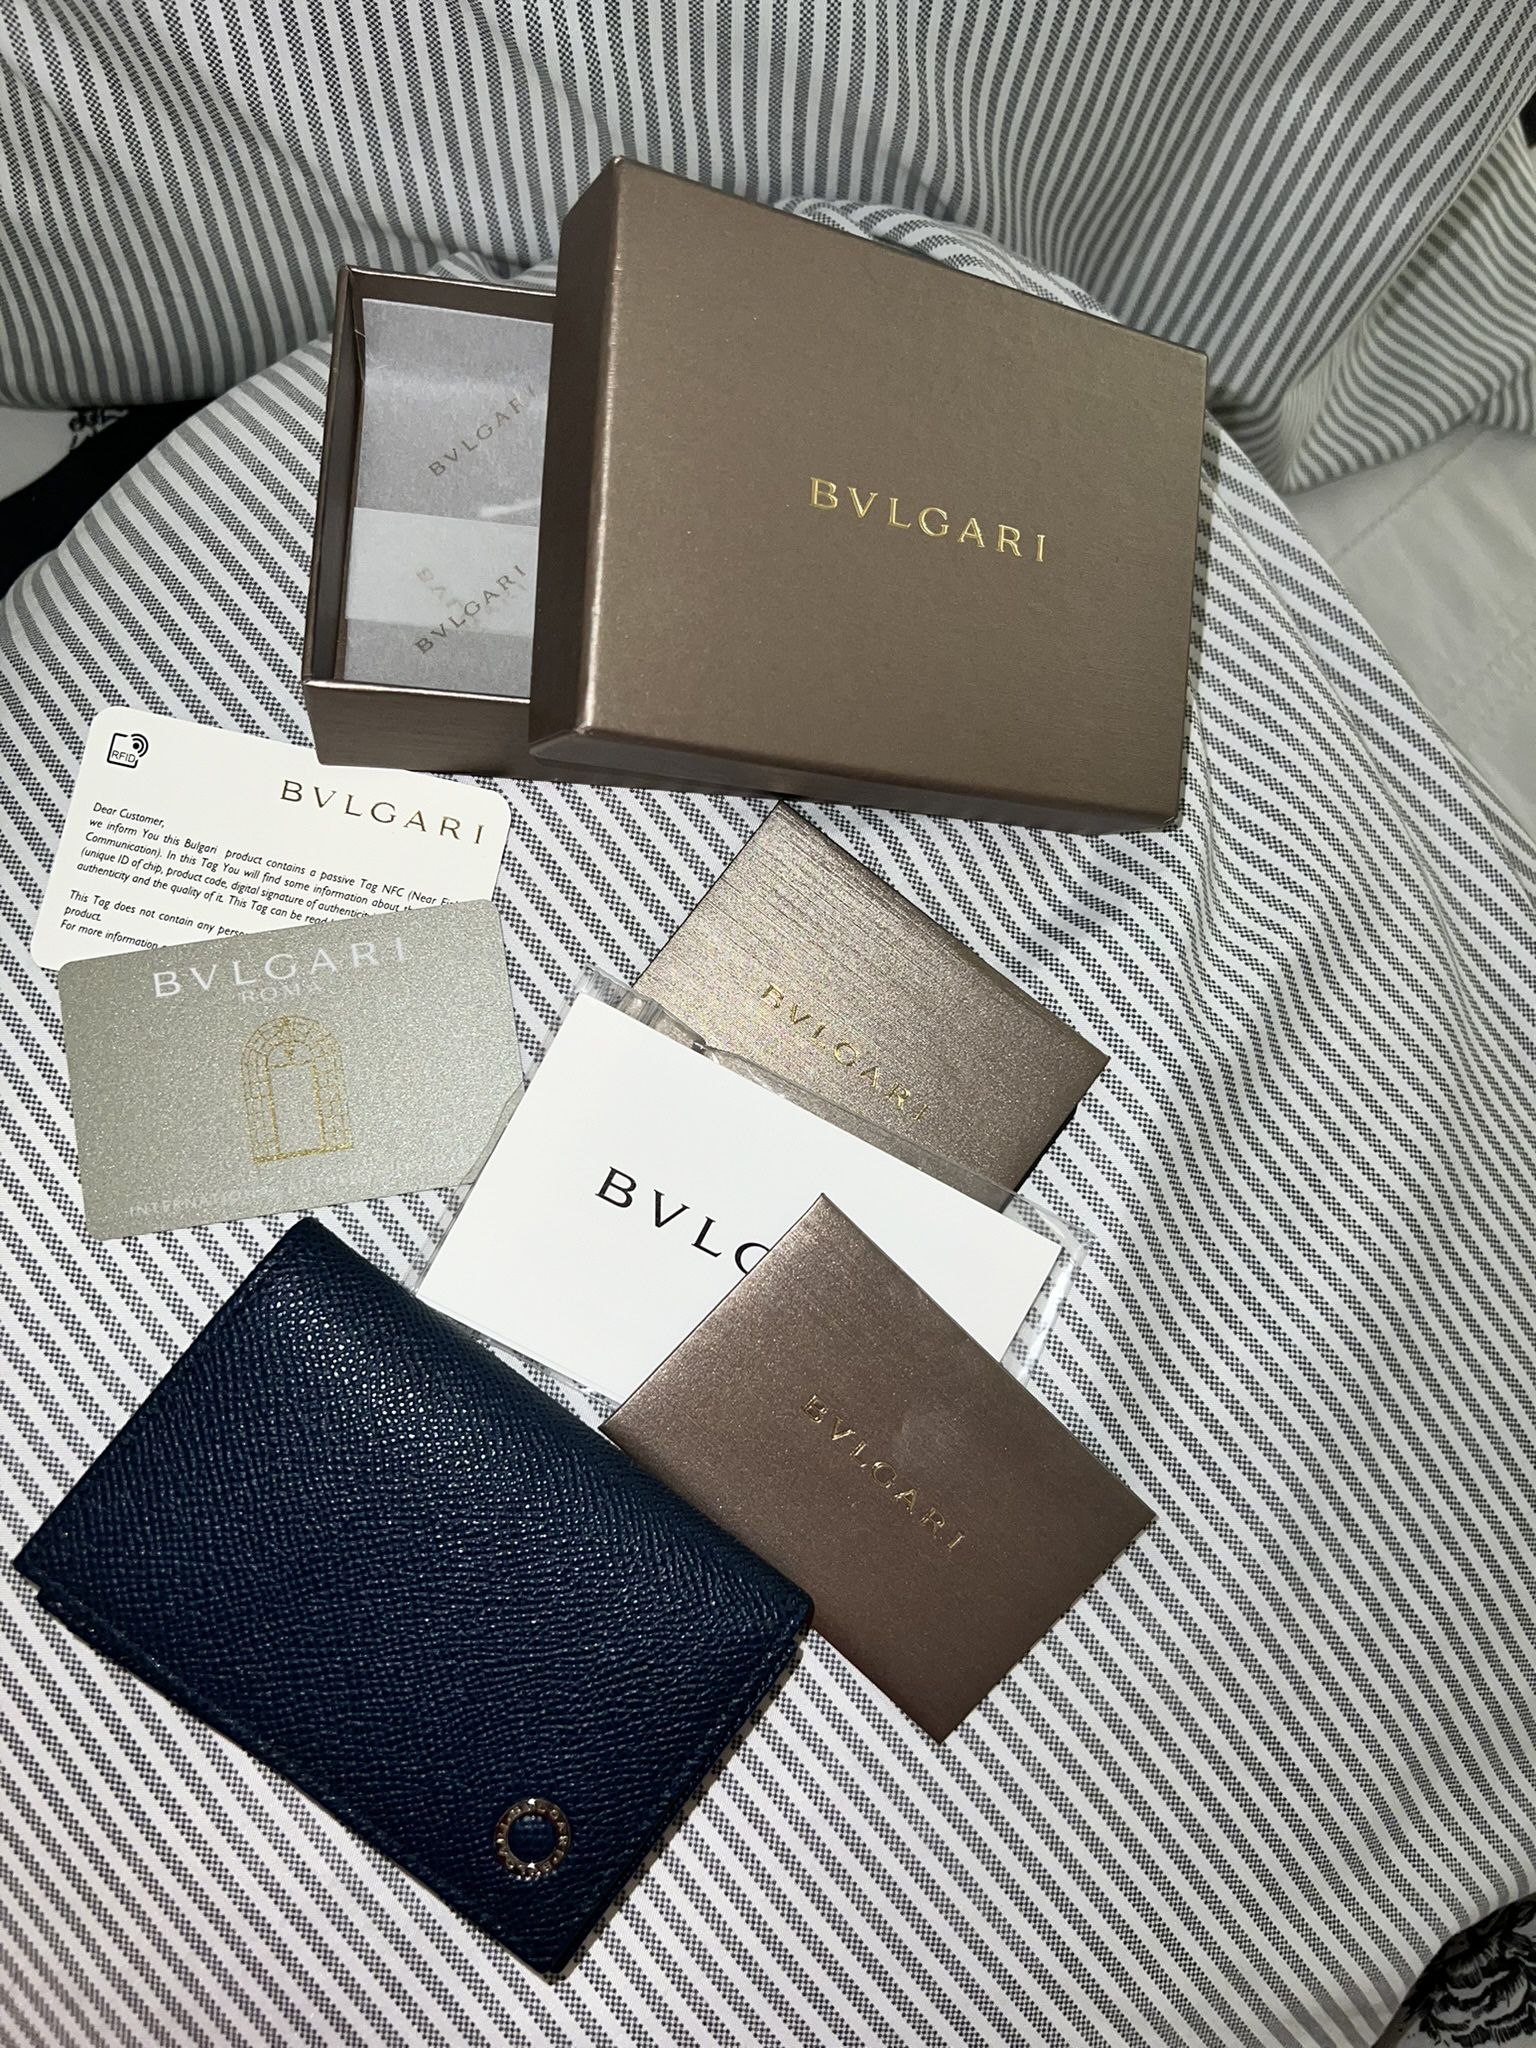 Authentic BVLGARI WALLET - Great Gift 🎁